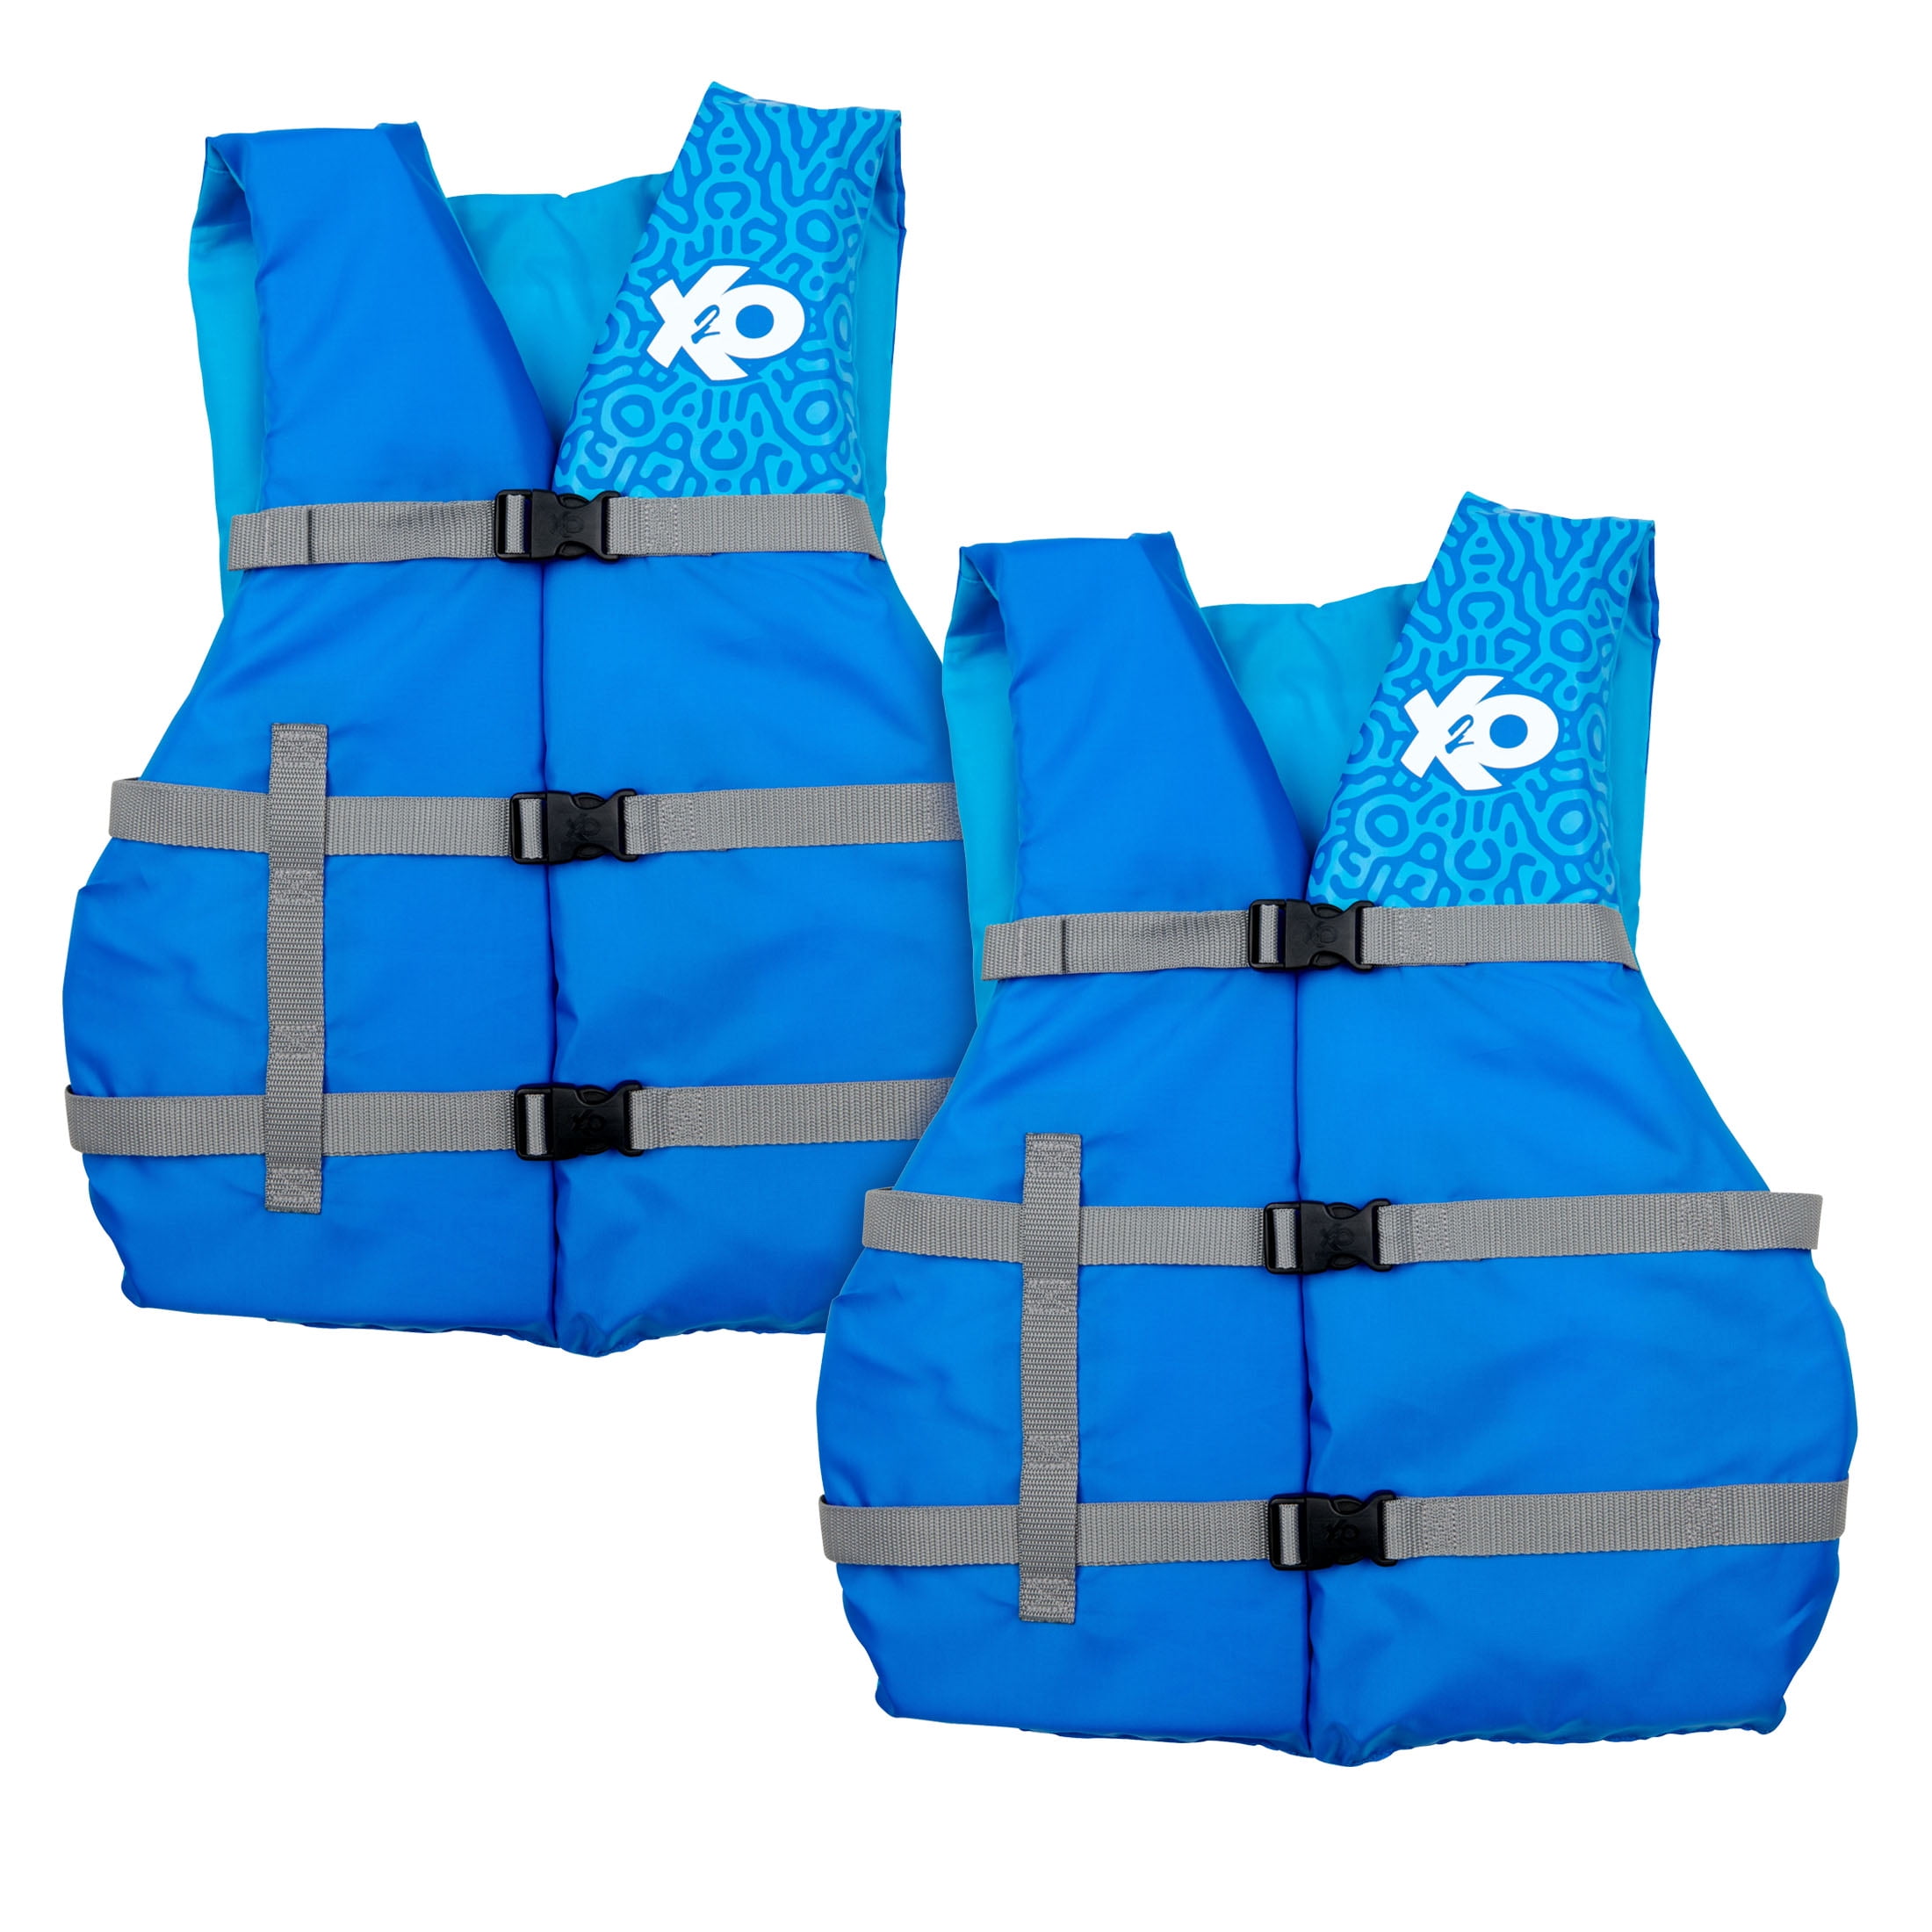 X2O Universal Adult Life Vest and Jacket (30" - 52" Chest), Blue Ocean Coral, 2-Pack